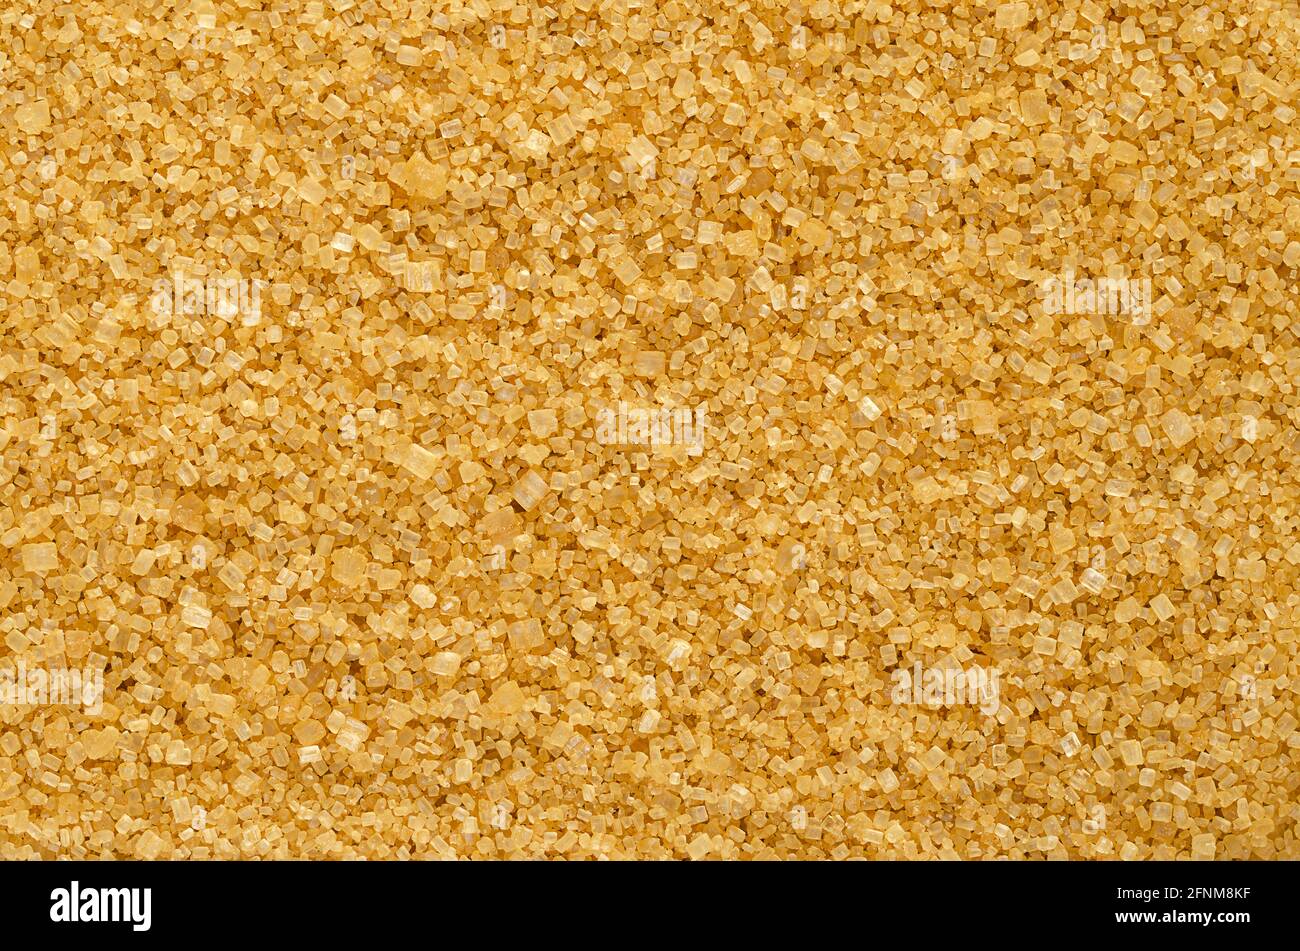 Brown demerara sugar, background, from above. Coarse, crystalline, natural and raw sugar, a sucrose sugar with distinctive yellow-brown color. Stock Photo